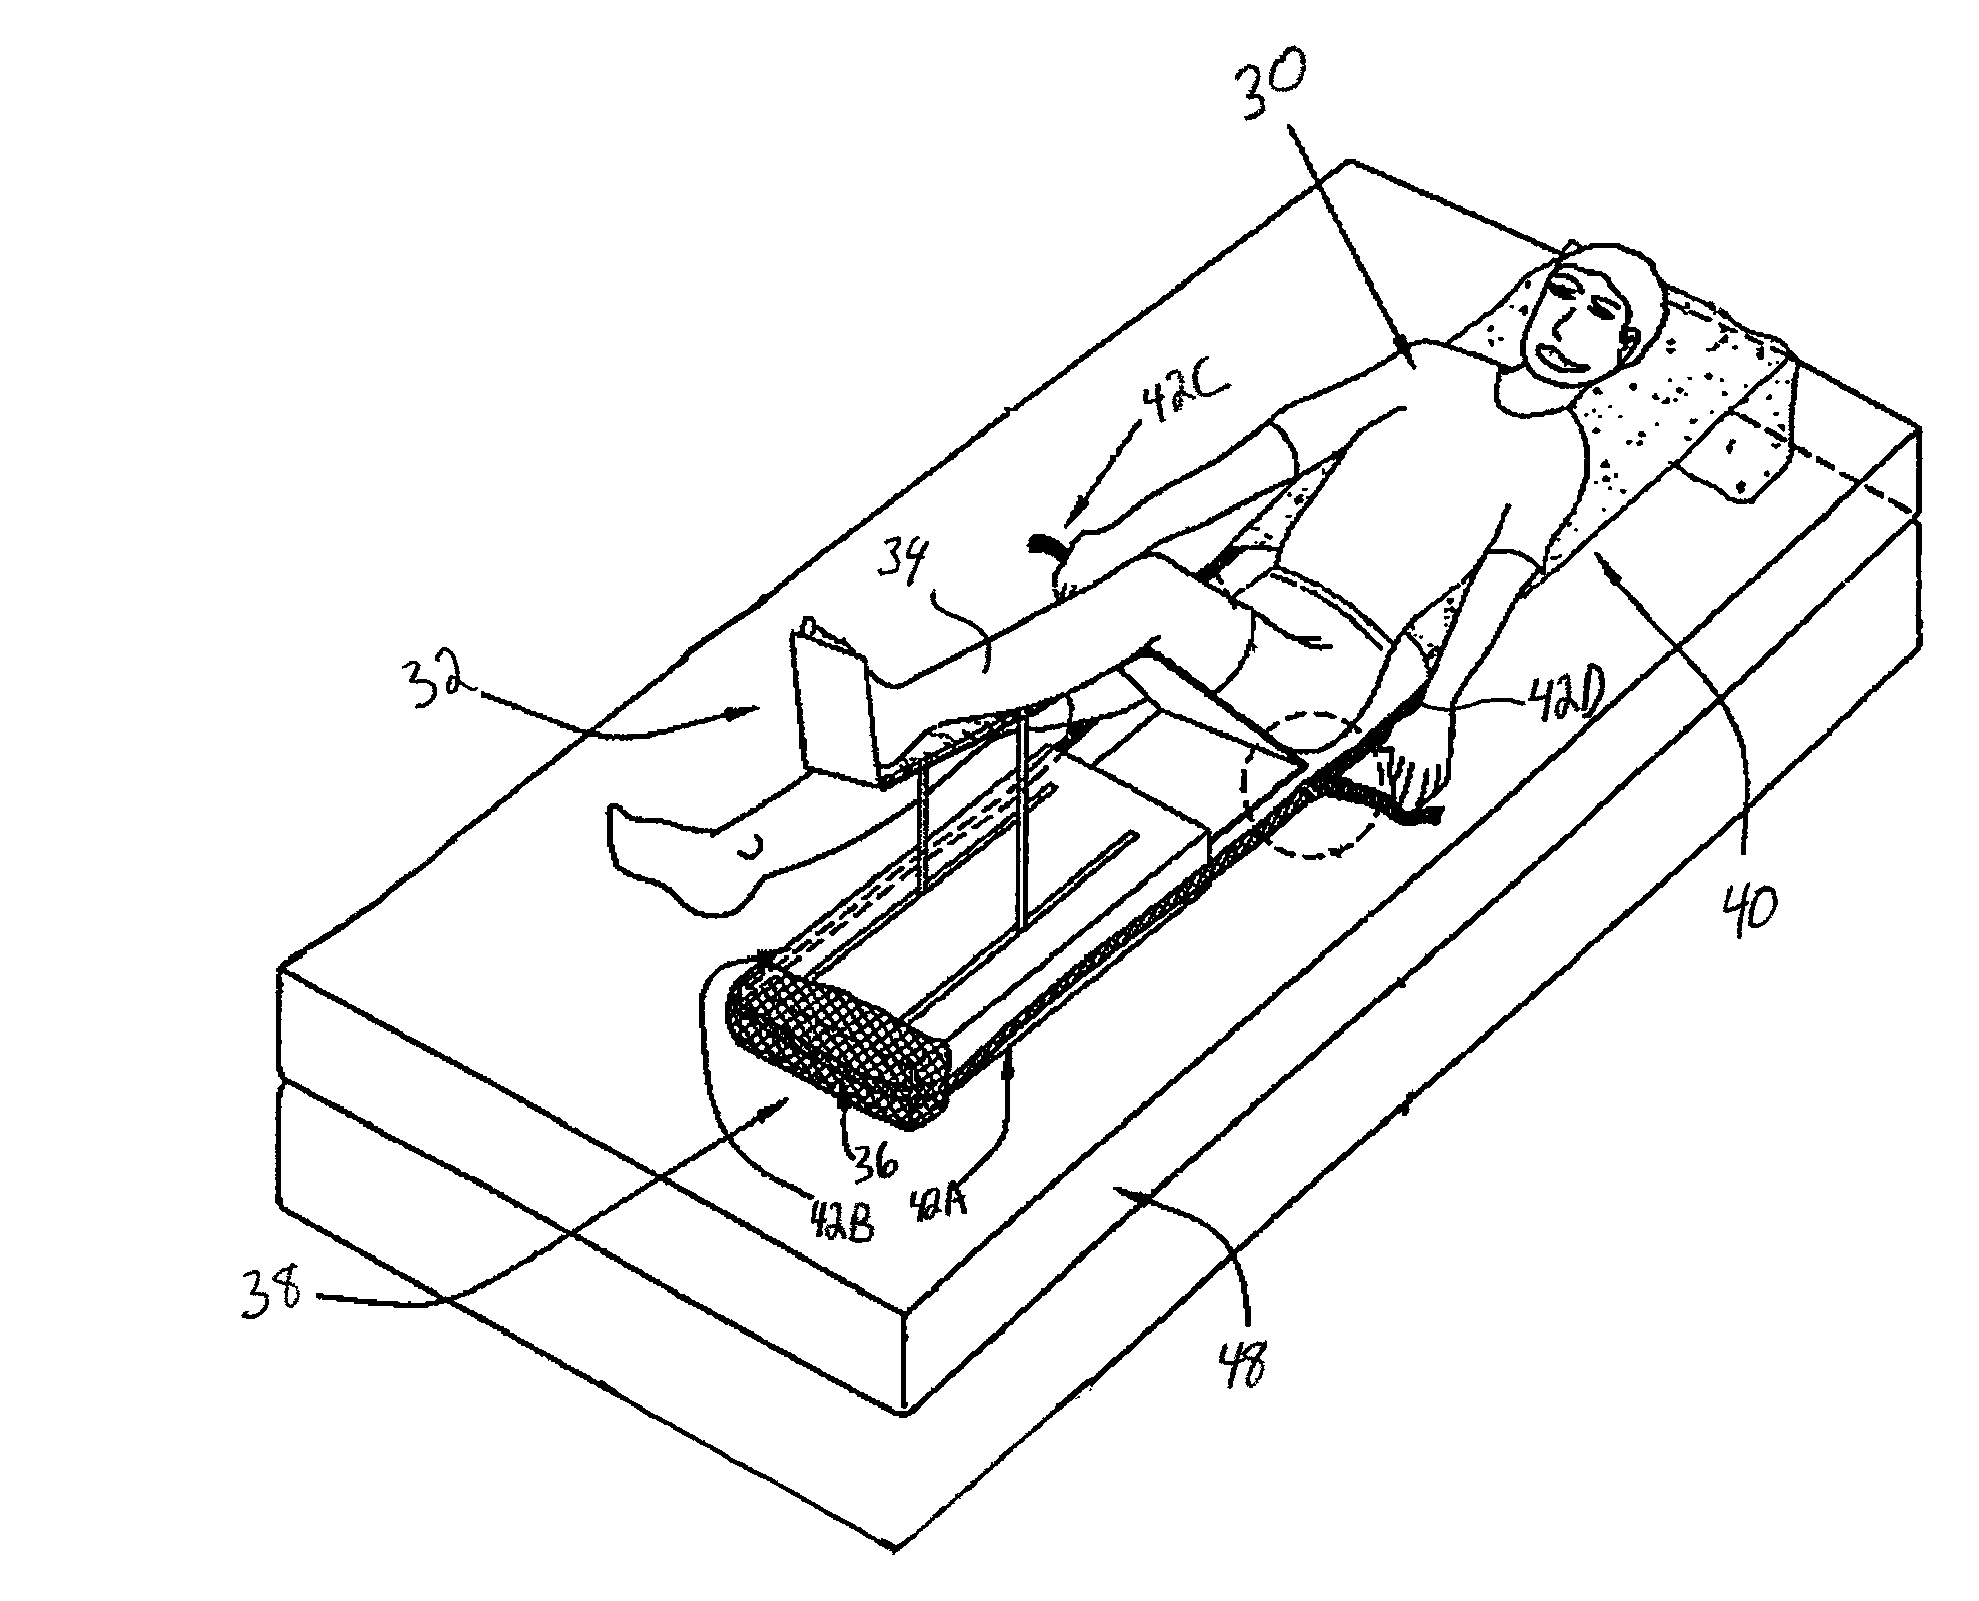 Slip-stop device for continuous passive motion machines